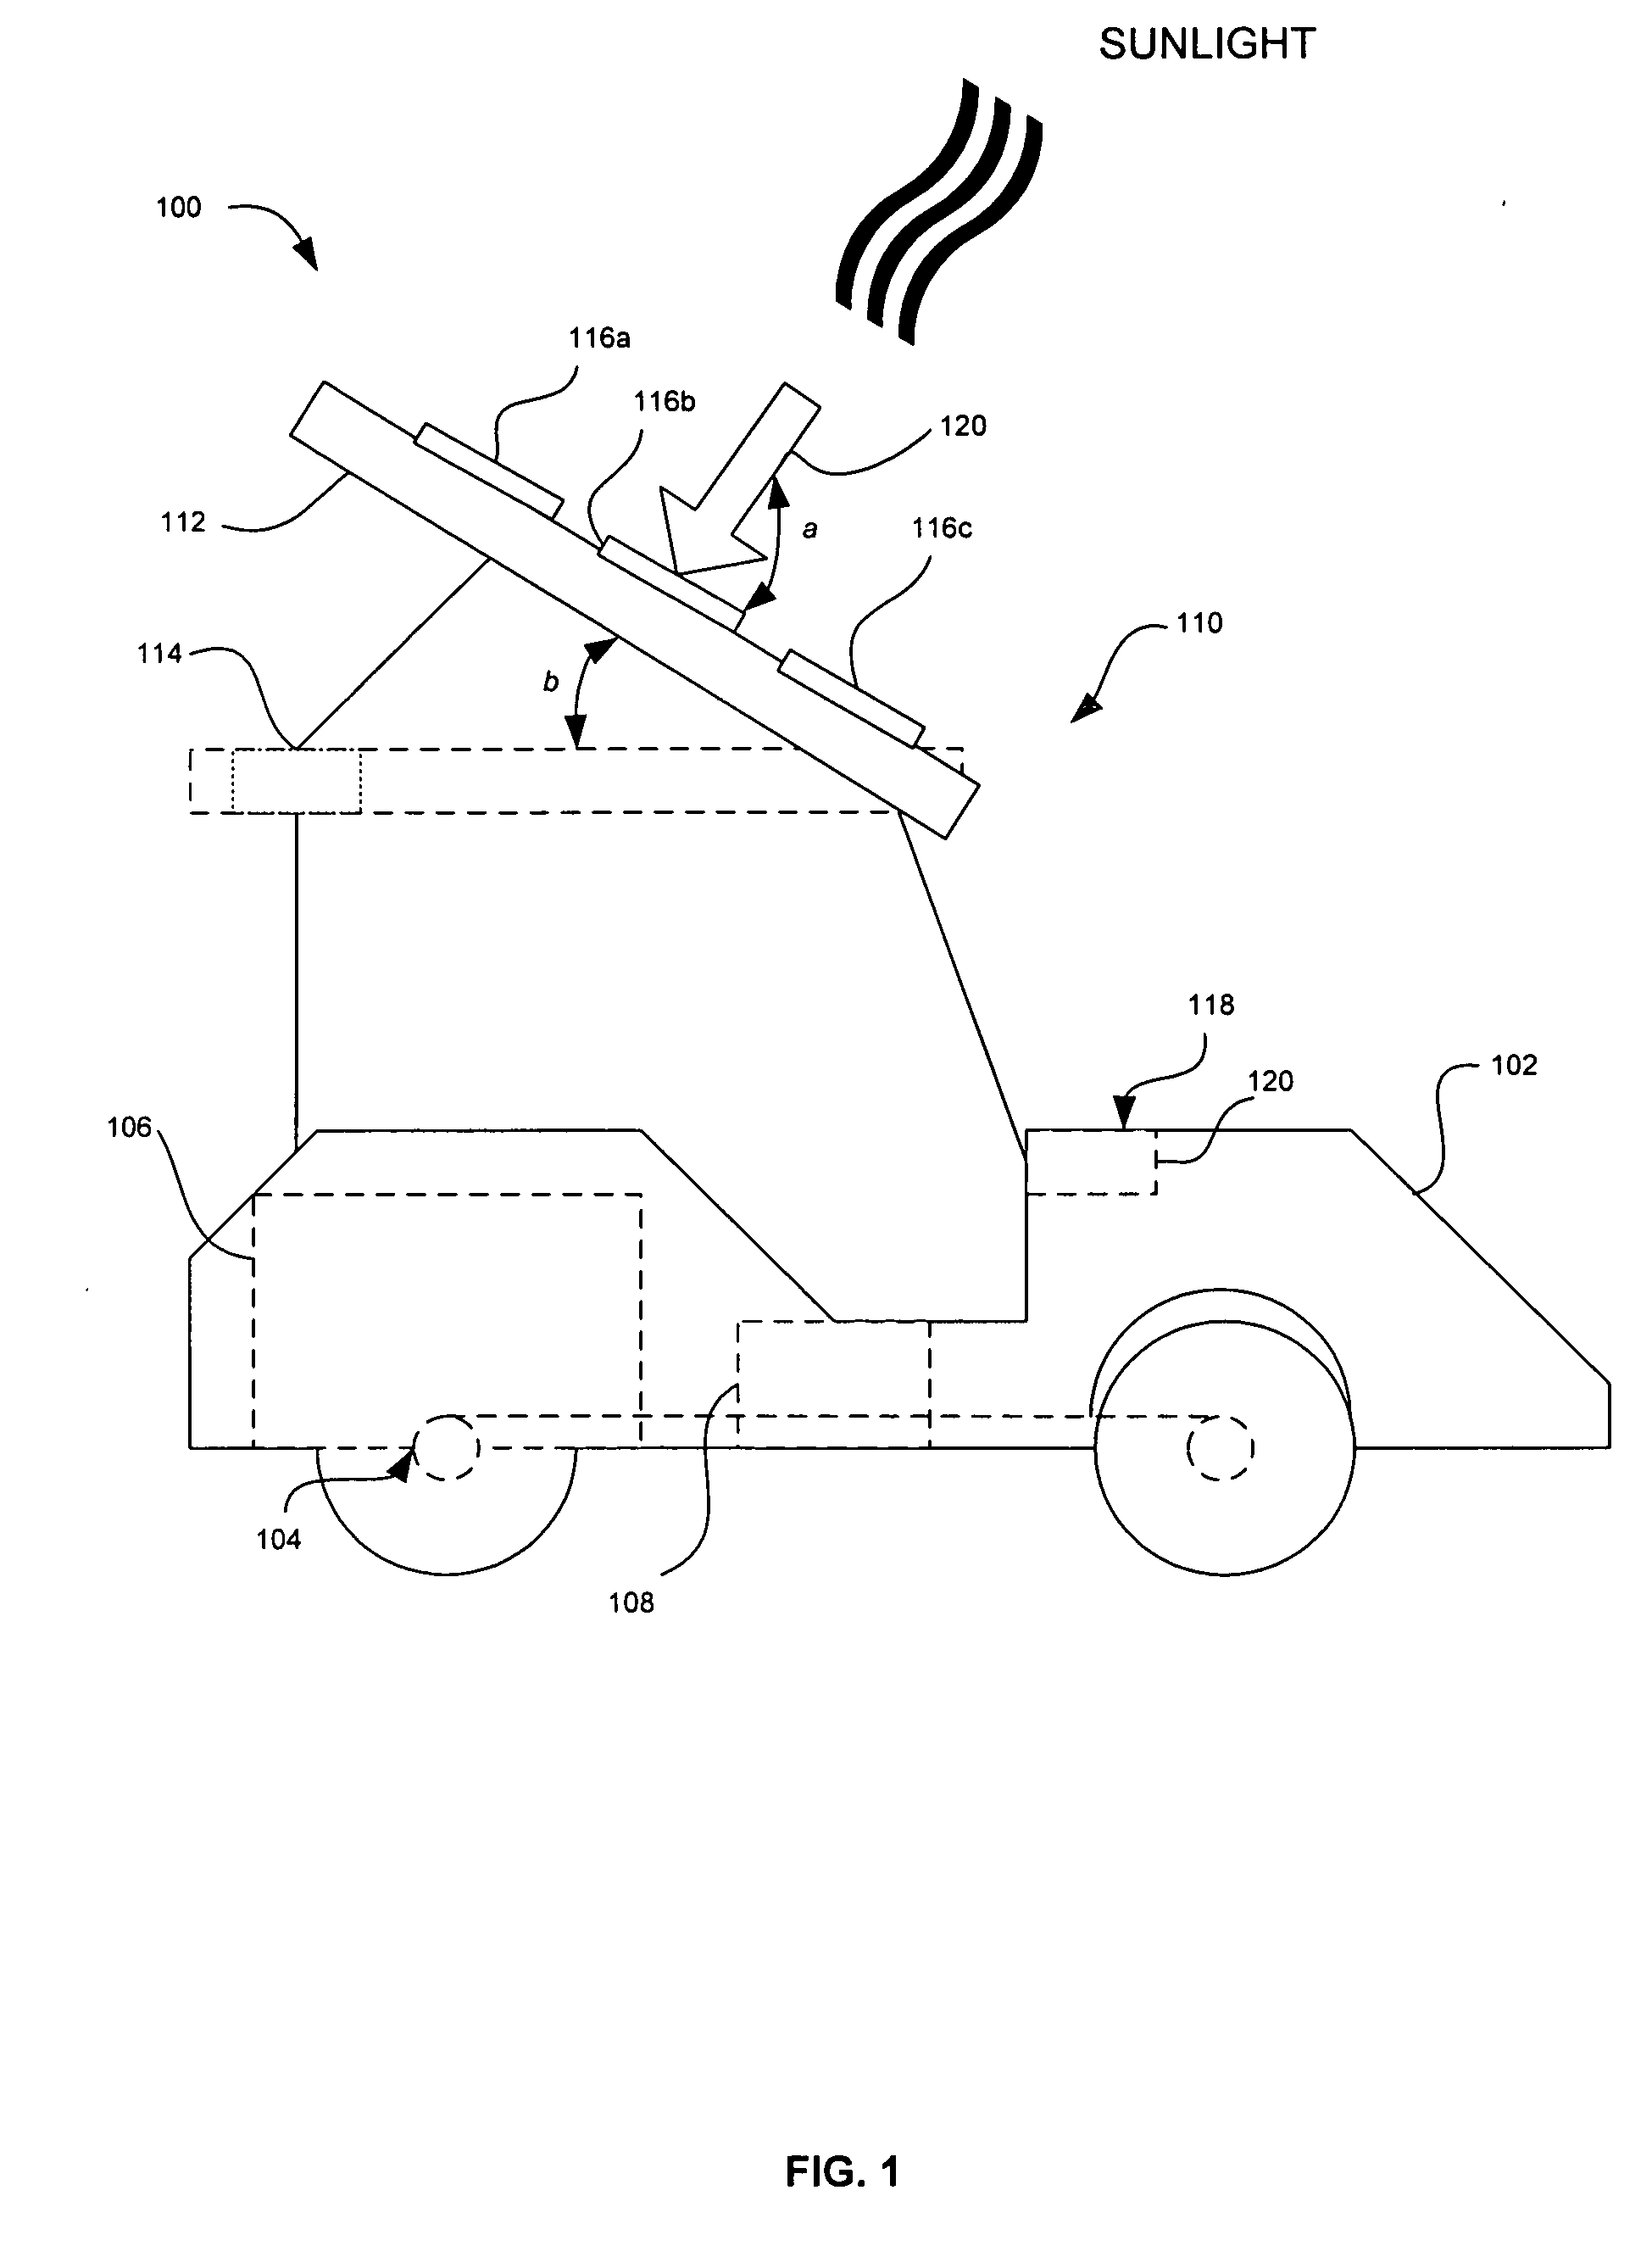 Powering a vehicle and providing excess energy to an external device using photovoltaic cells